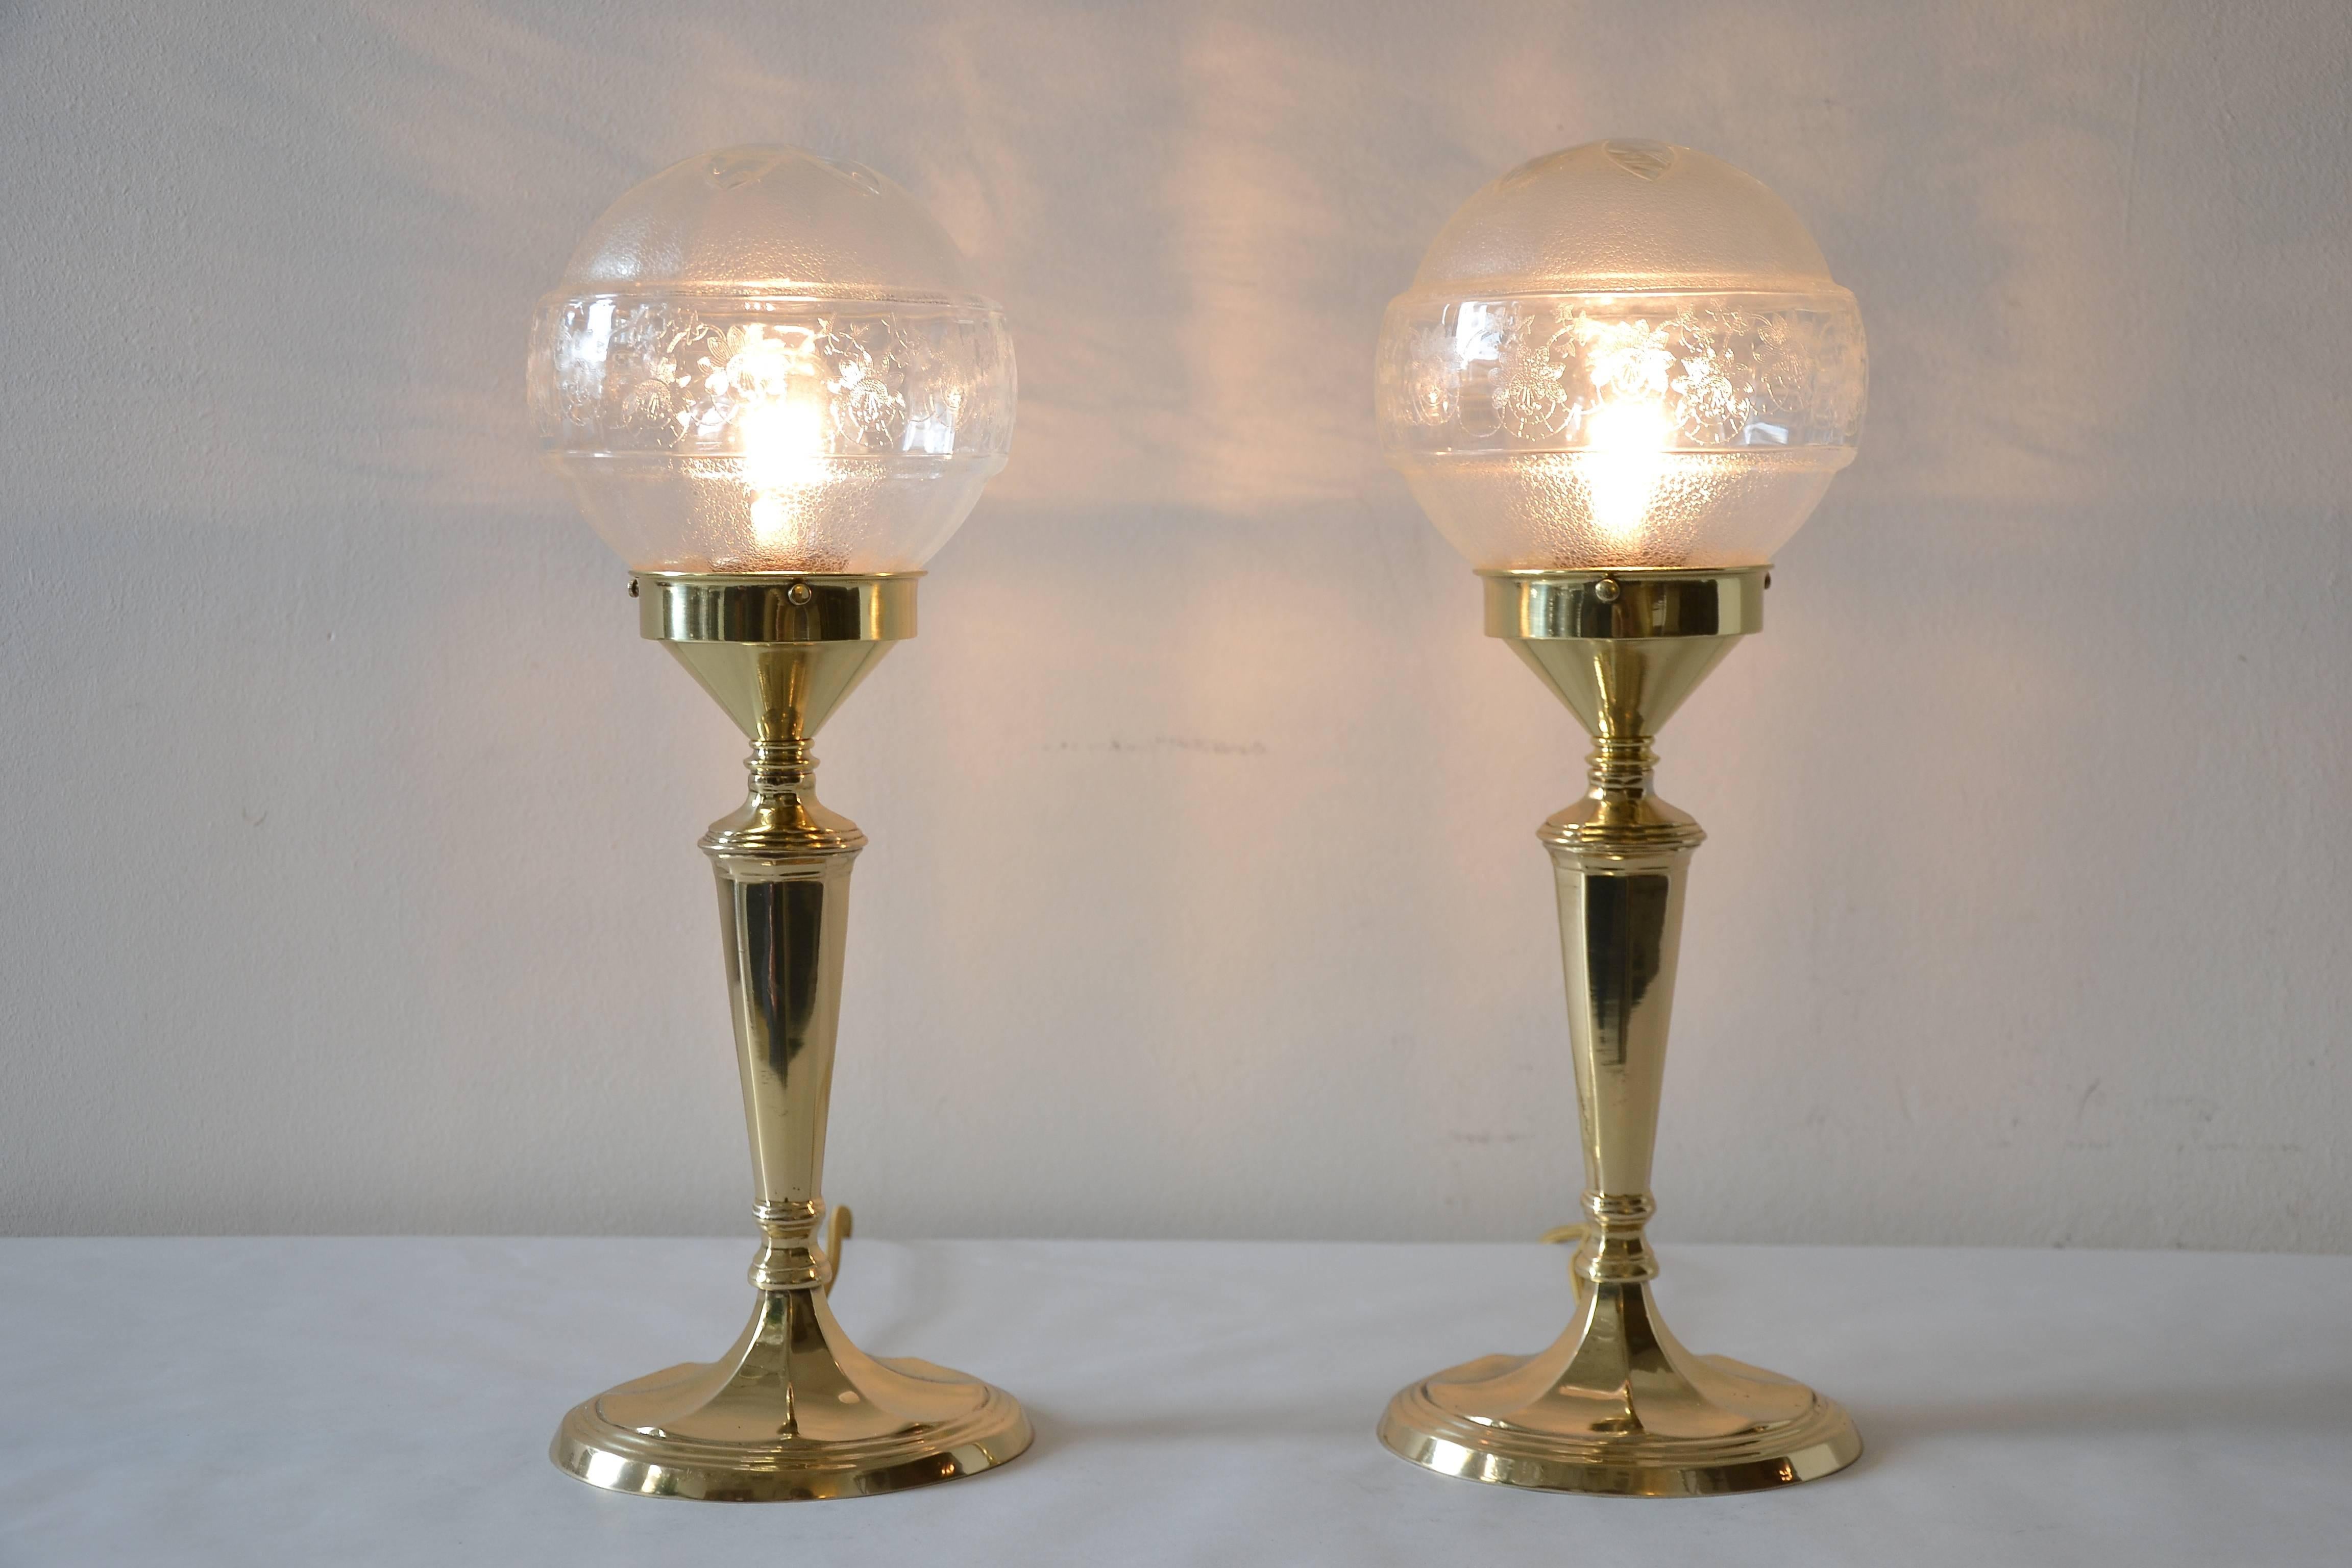 Pair of table lamps with oval base and original glass
polished and stove enamelled